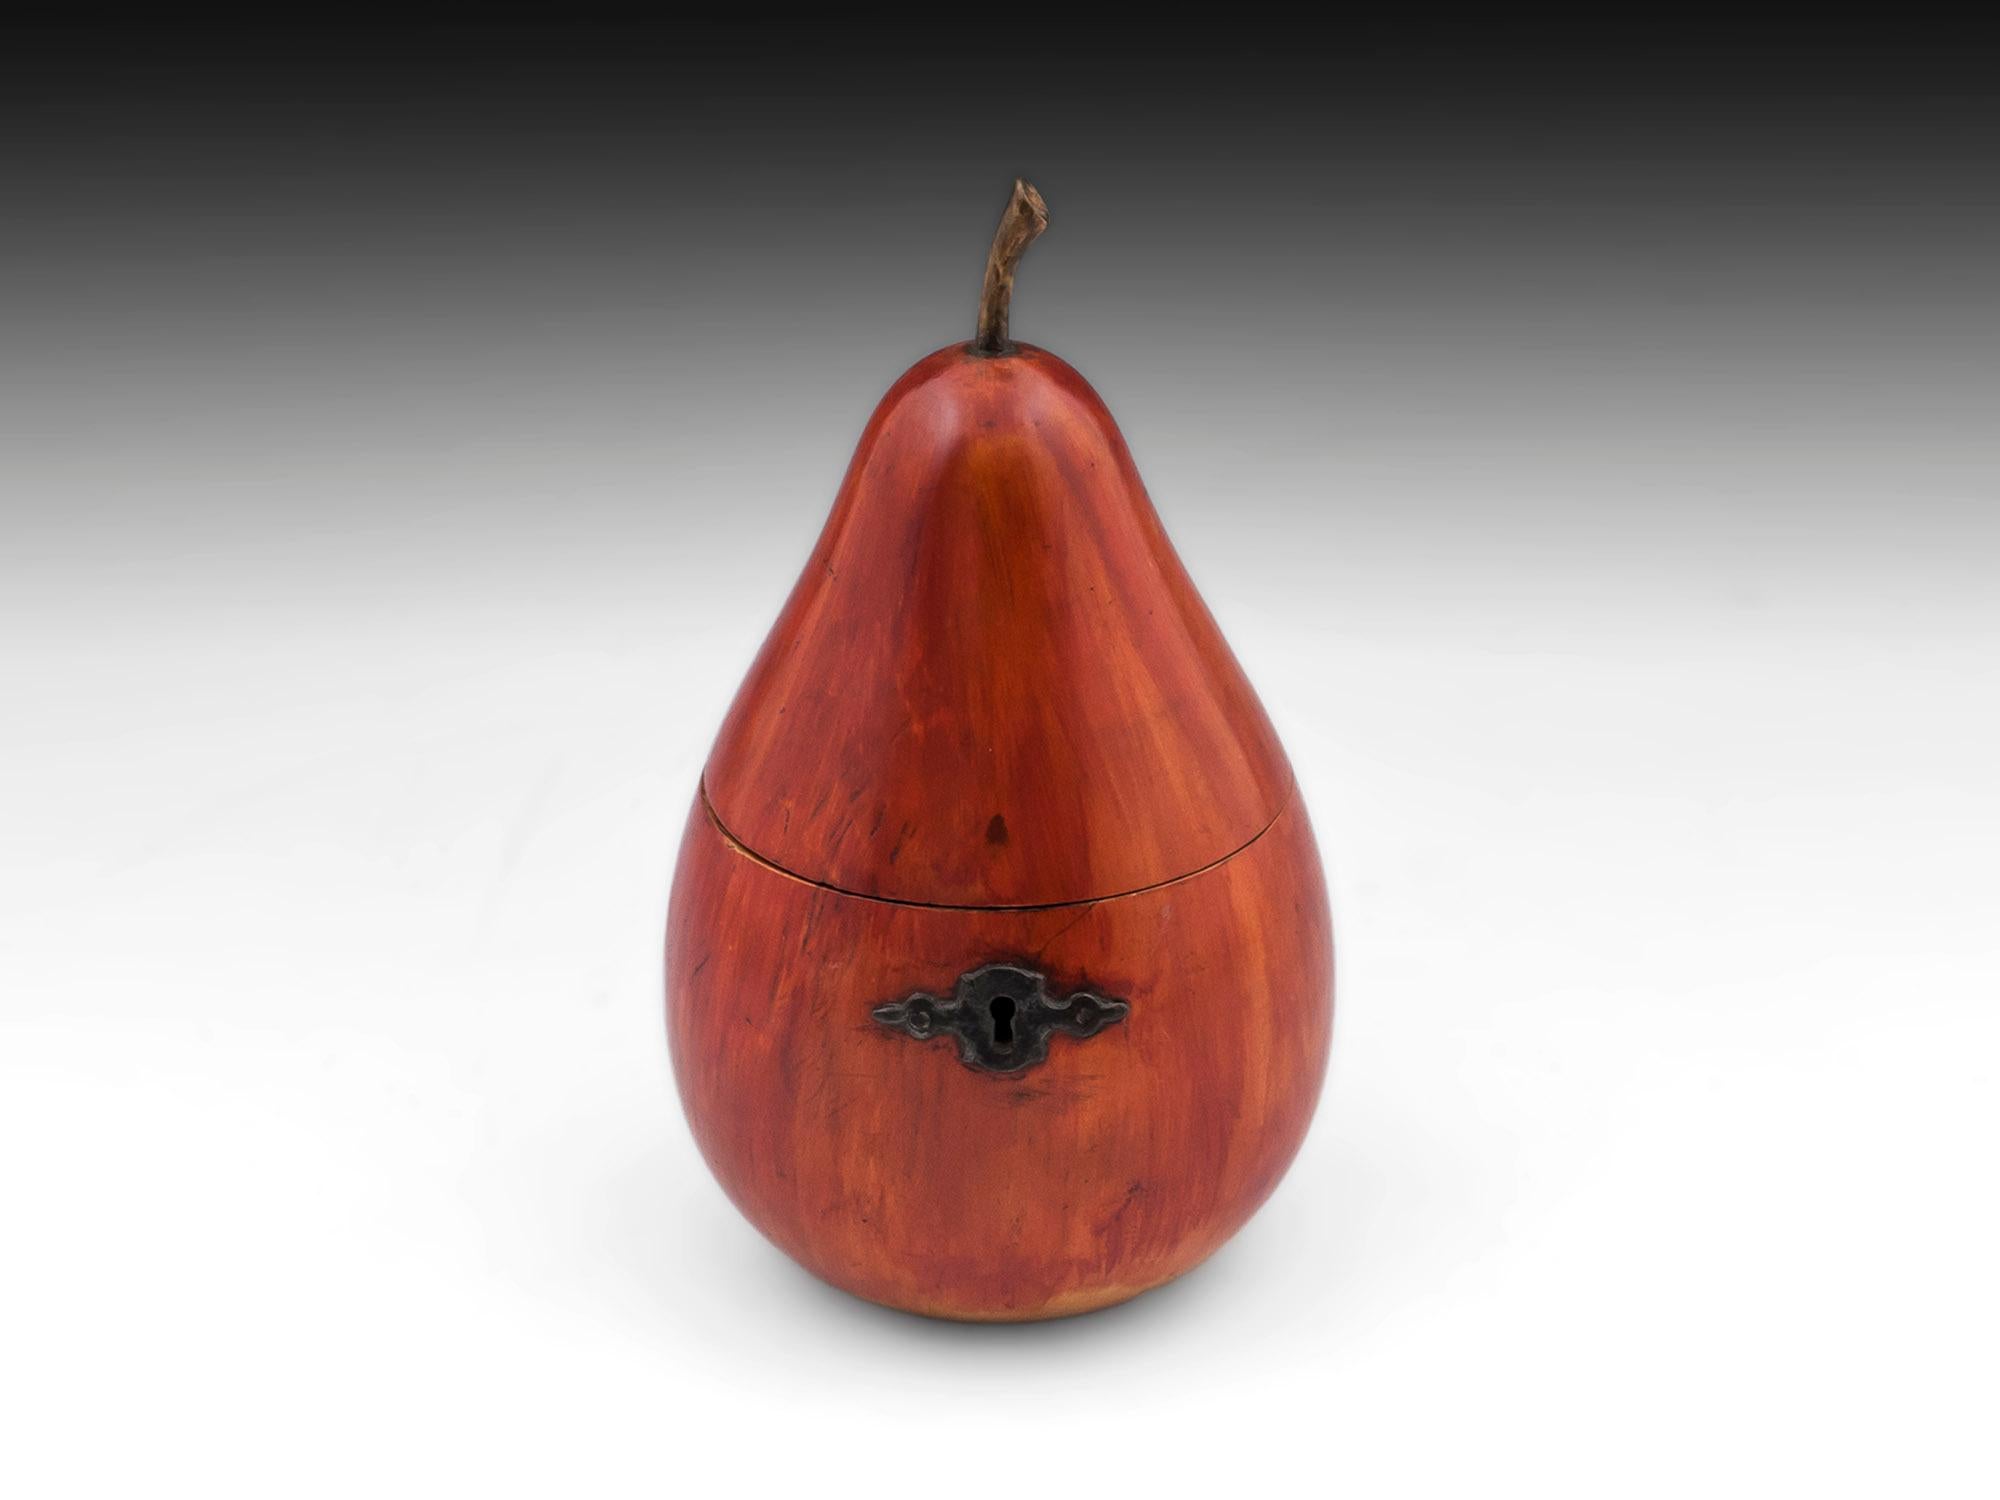 Beautiful shaped pear tea caddy with wonderful vibrant red blushing to its body having a realistic wooden stalk, with steel hinge, lock and ornate escutcheon. 

The antique pear tea caddy still has traces of tin lining and has a working lock with